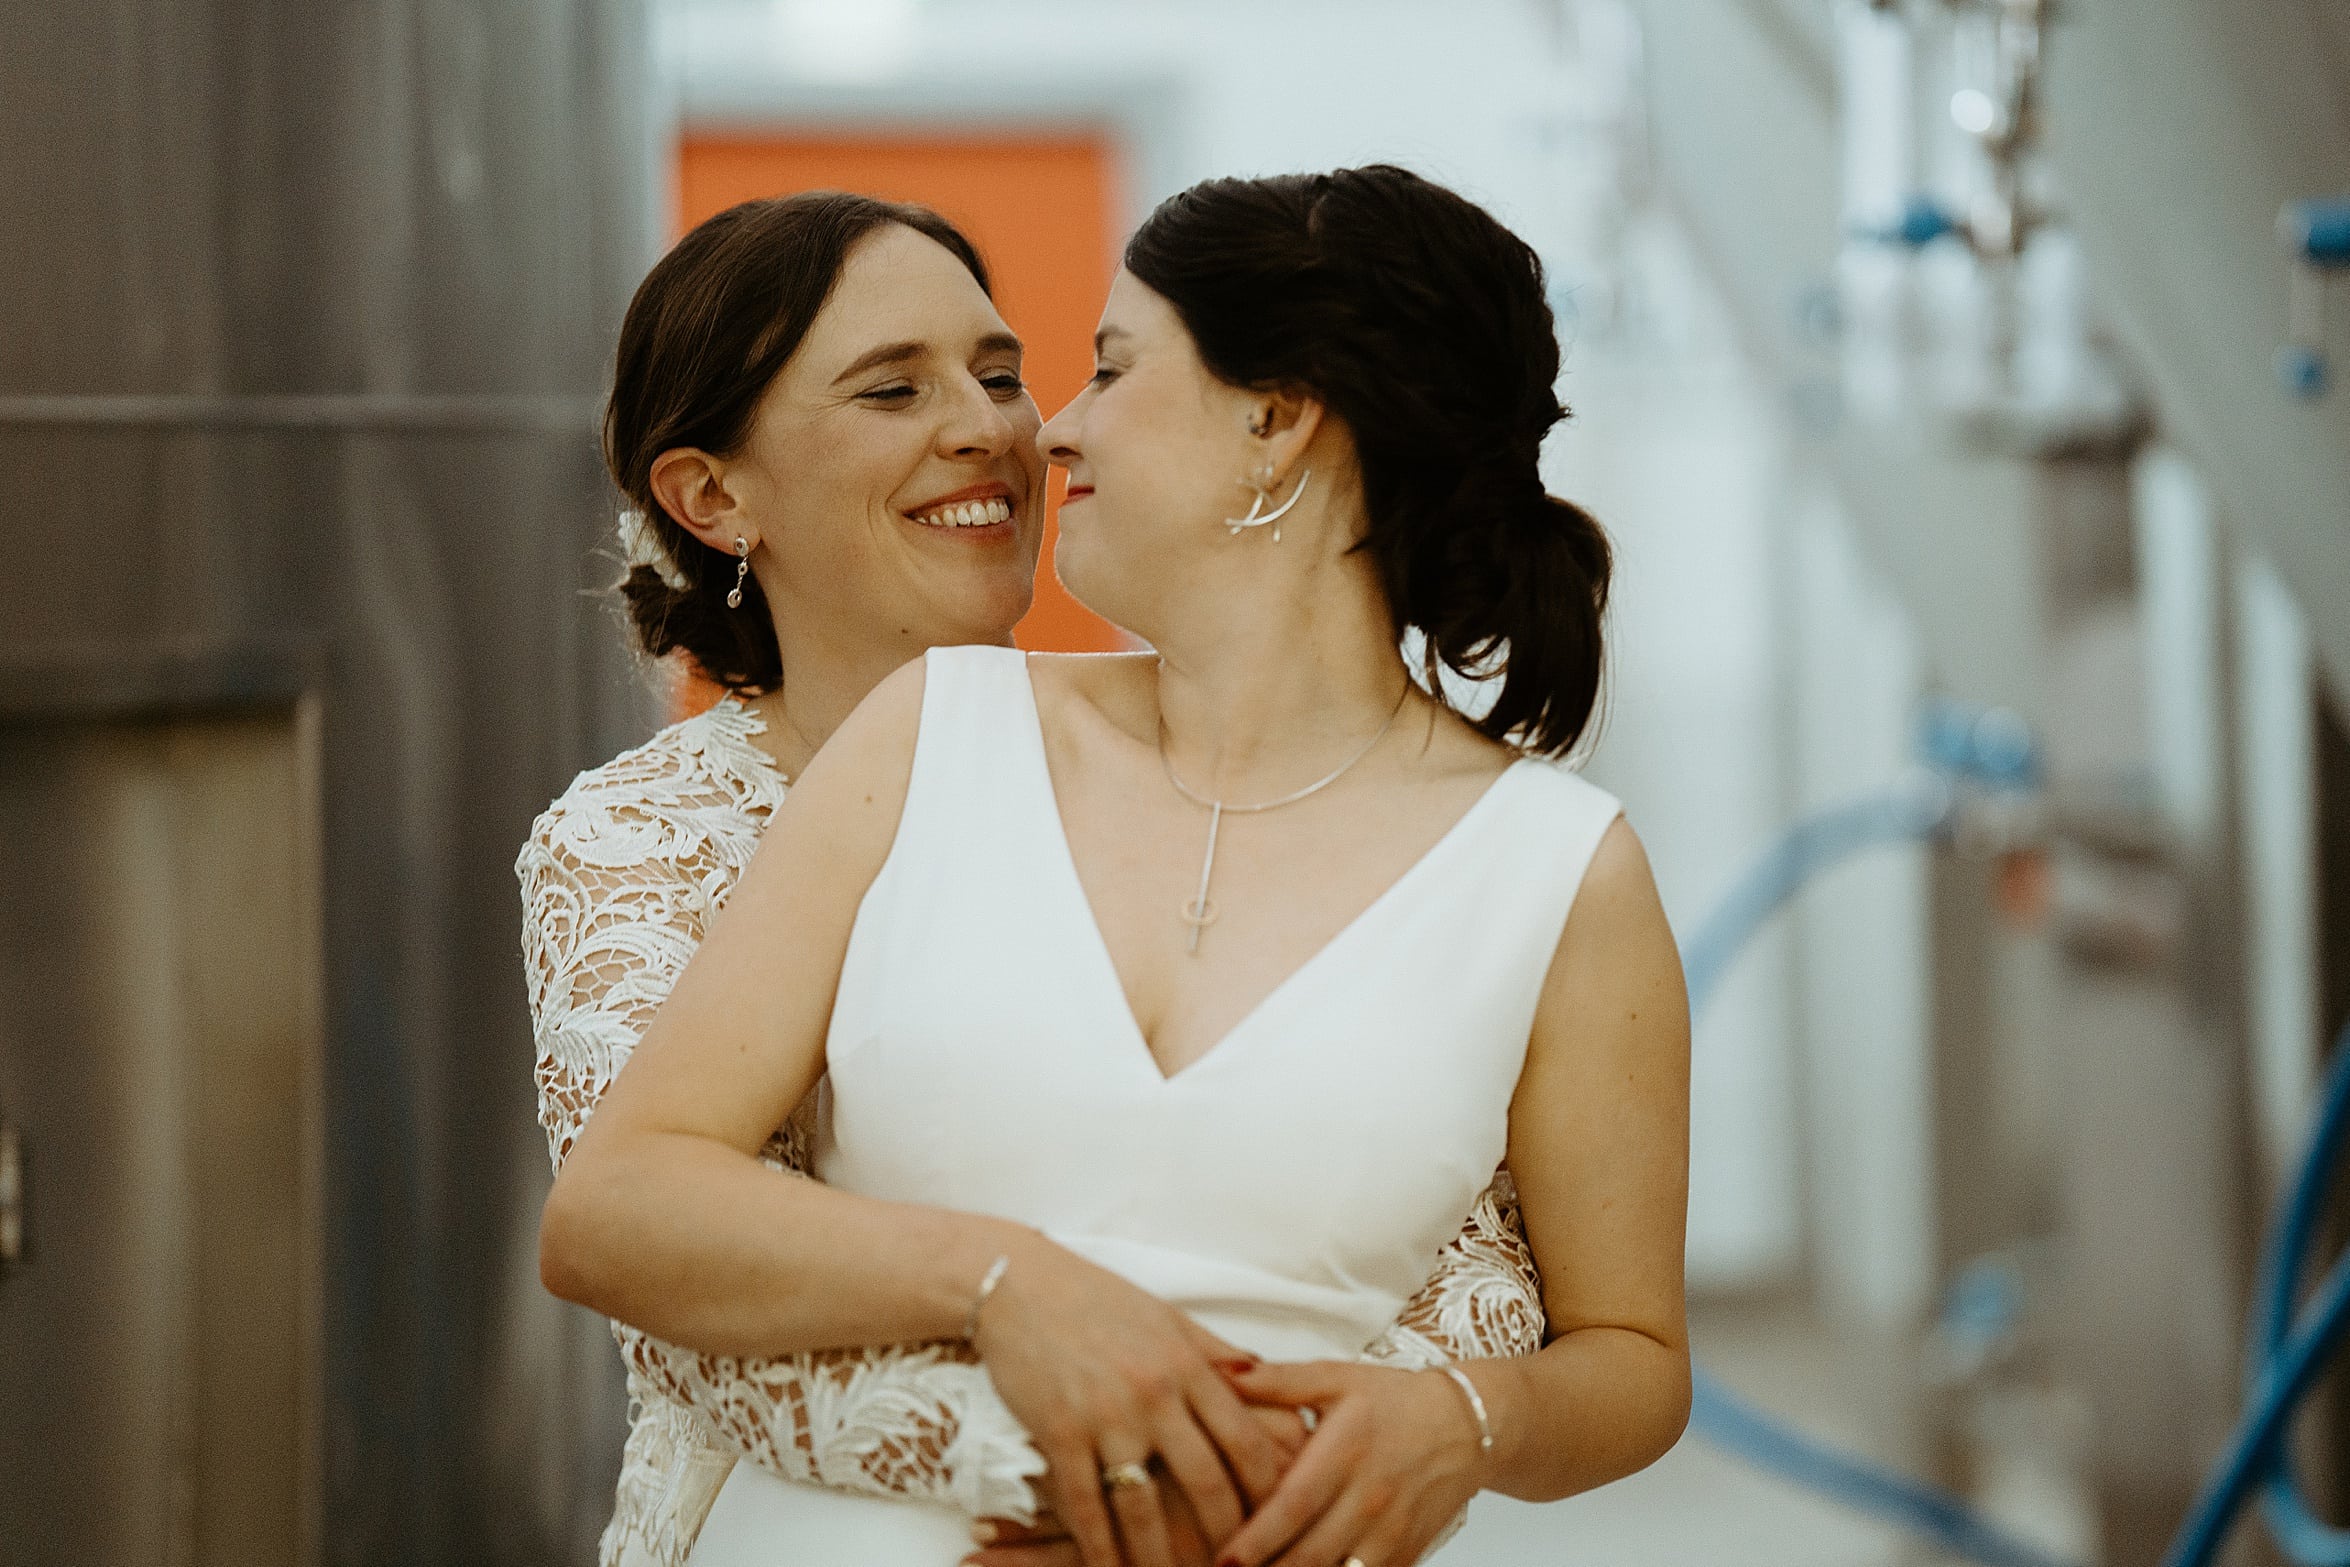 brides hugging and smiling in brewing room west brewery wedding exclusive use wedding venues scotland